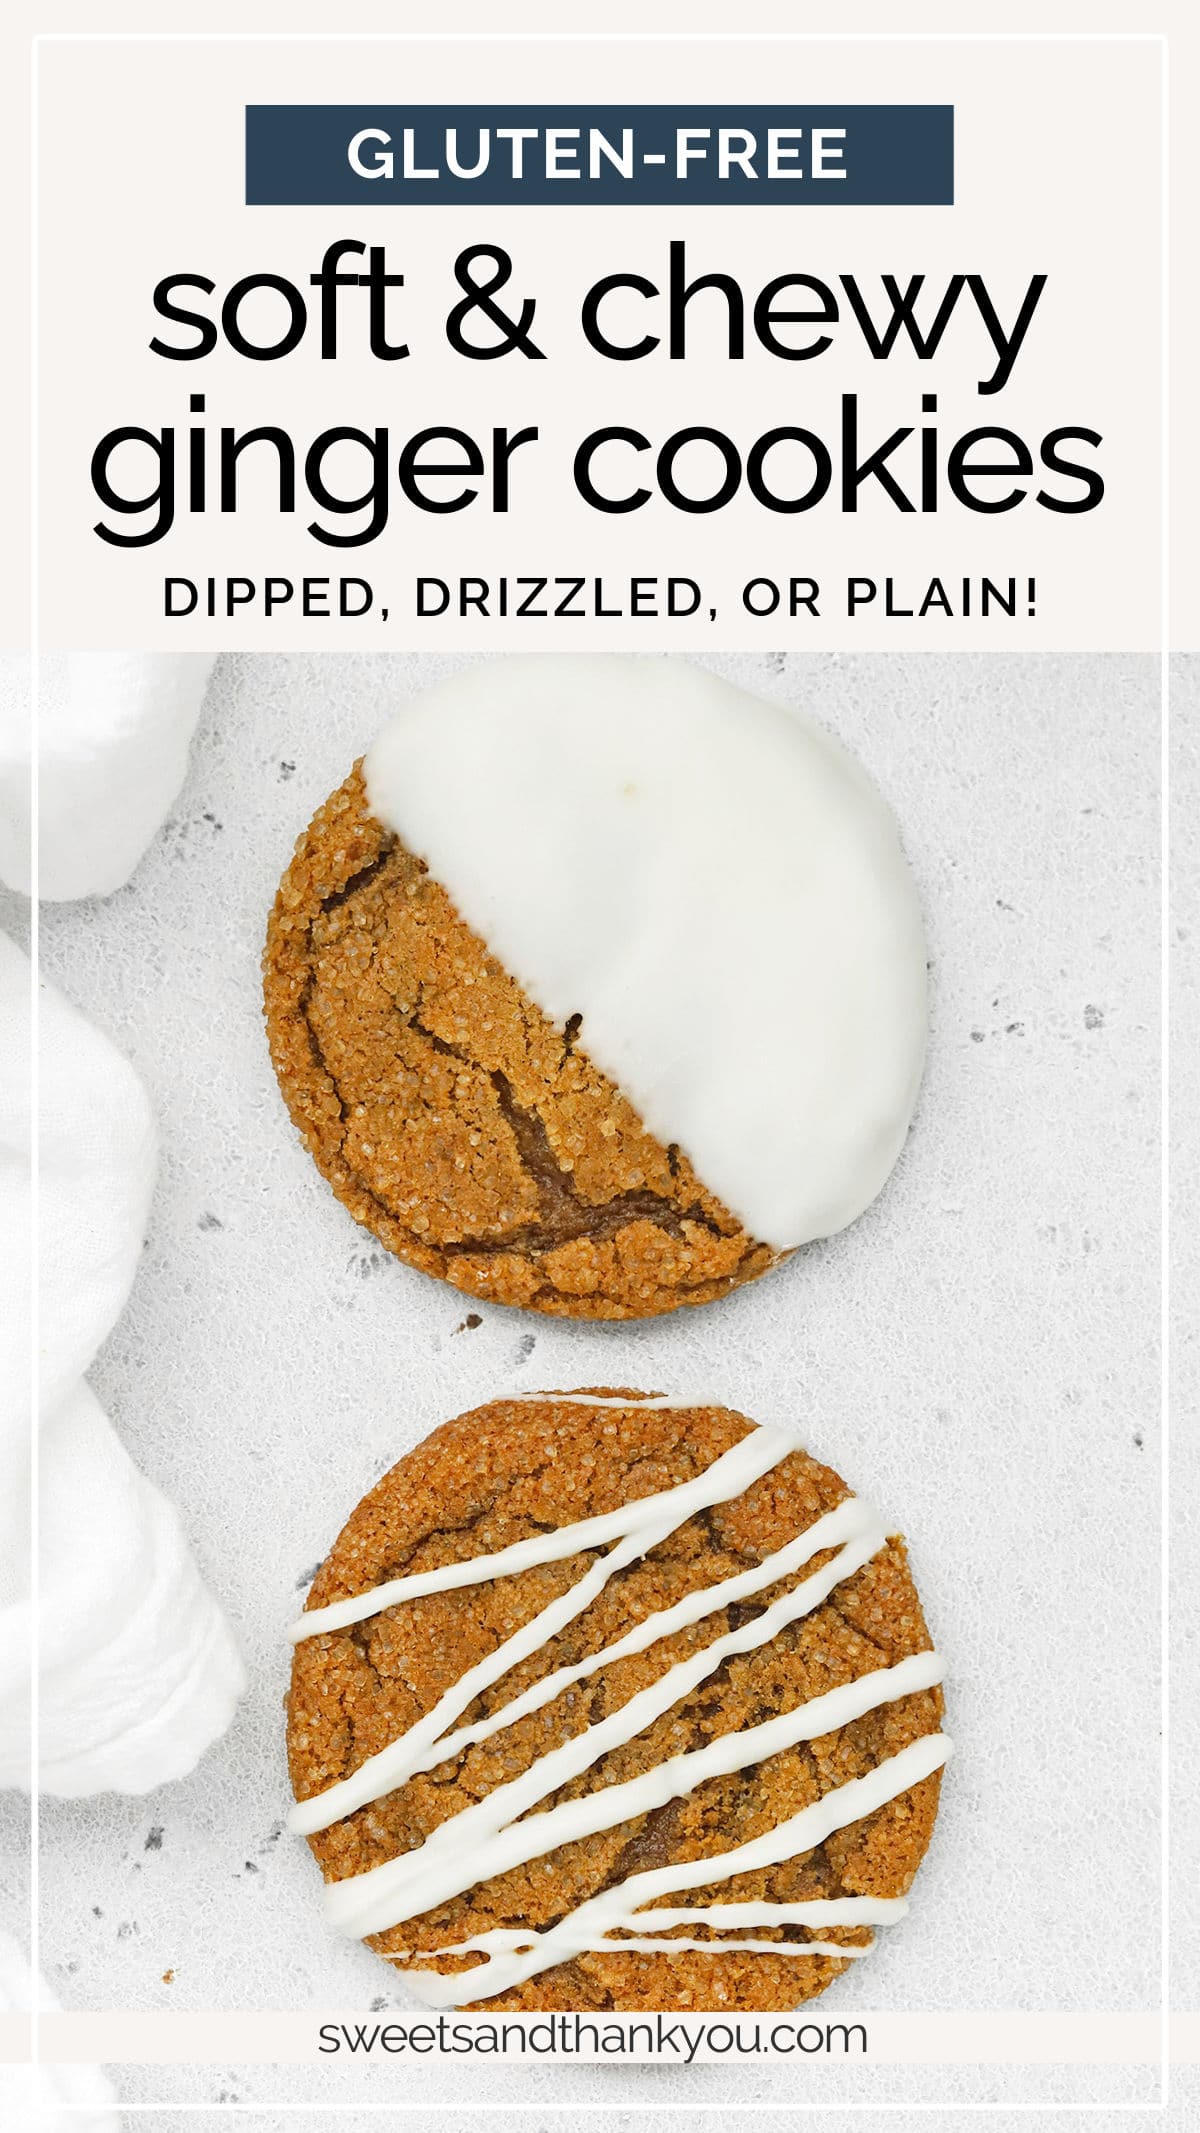 Soft & Chewy Gluten-Free Ginger Cookies - These gorgeous soft ginger cookies taste even better than they look. Try them drizzled or dipped in white chocolate for an extra pretty finish! // gluten free ginger cookies // chewy ginger cookies // soft ginger cookies // holiday ginger cookies // dipped ginger cookies // easy ginger cookies // gluten free holiday cookies // holiday cookie plate